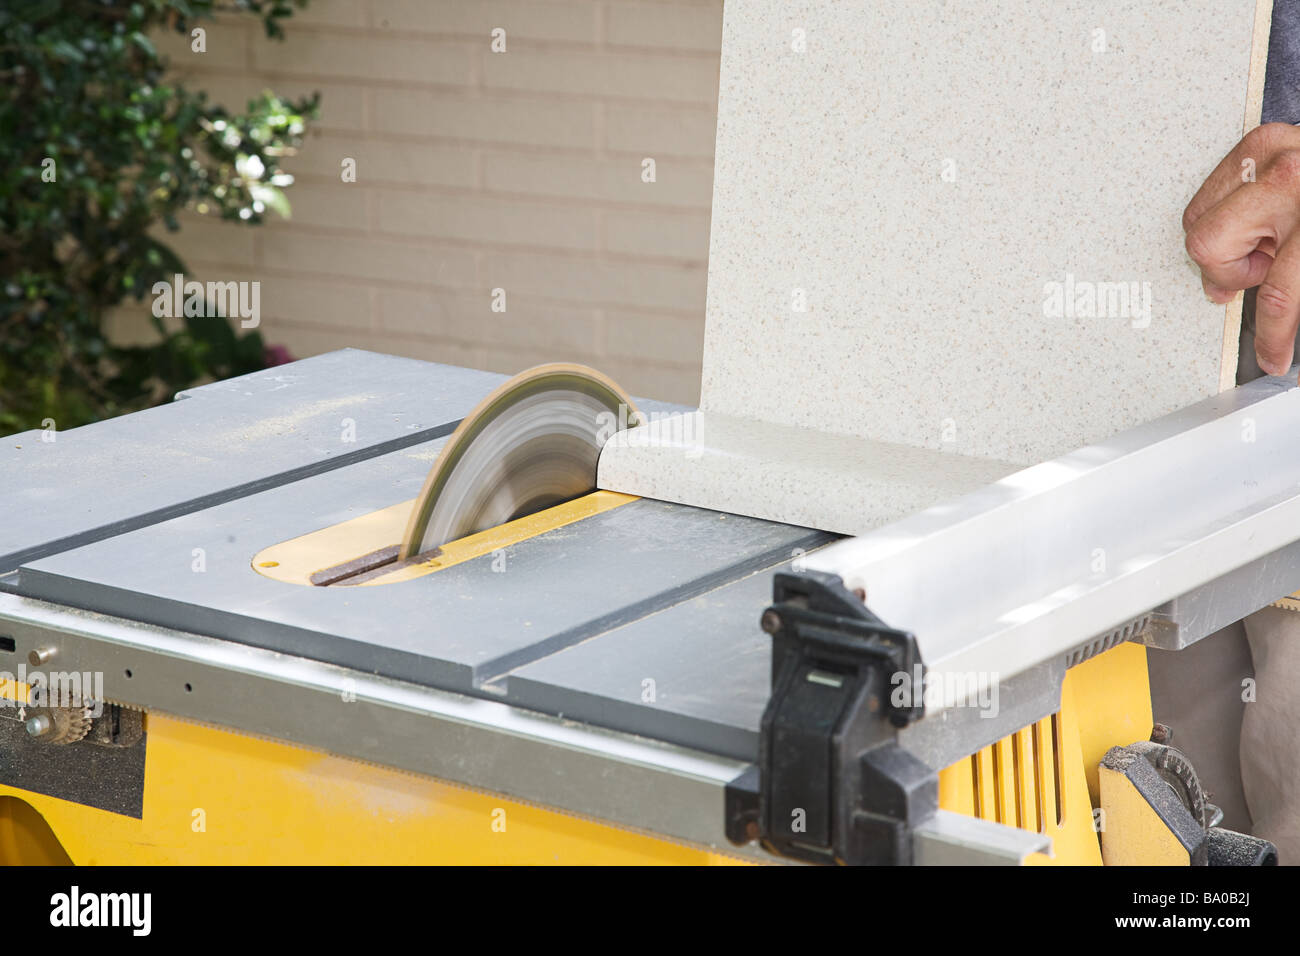 Carpenter Uses A Table Saw To Cut Laminate Counter Top Stock Photo